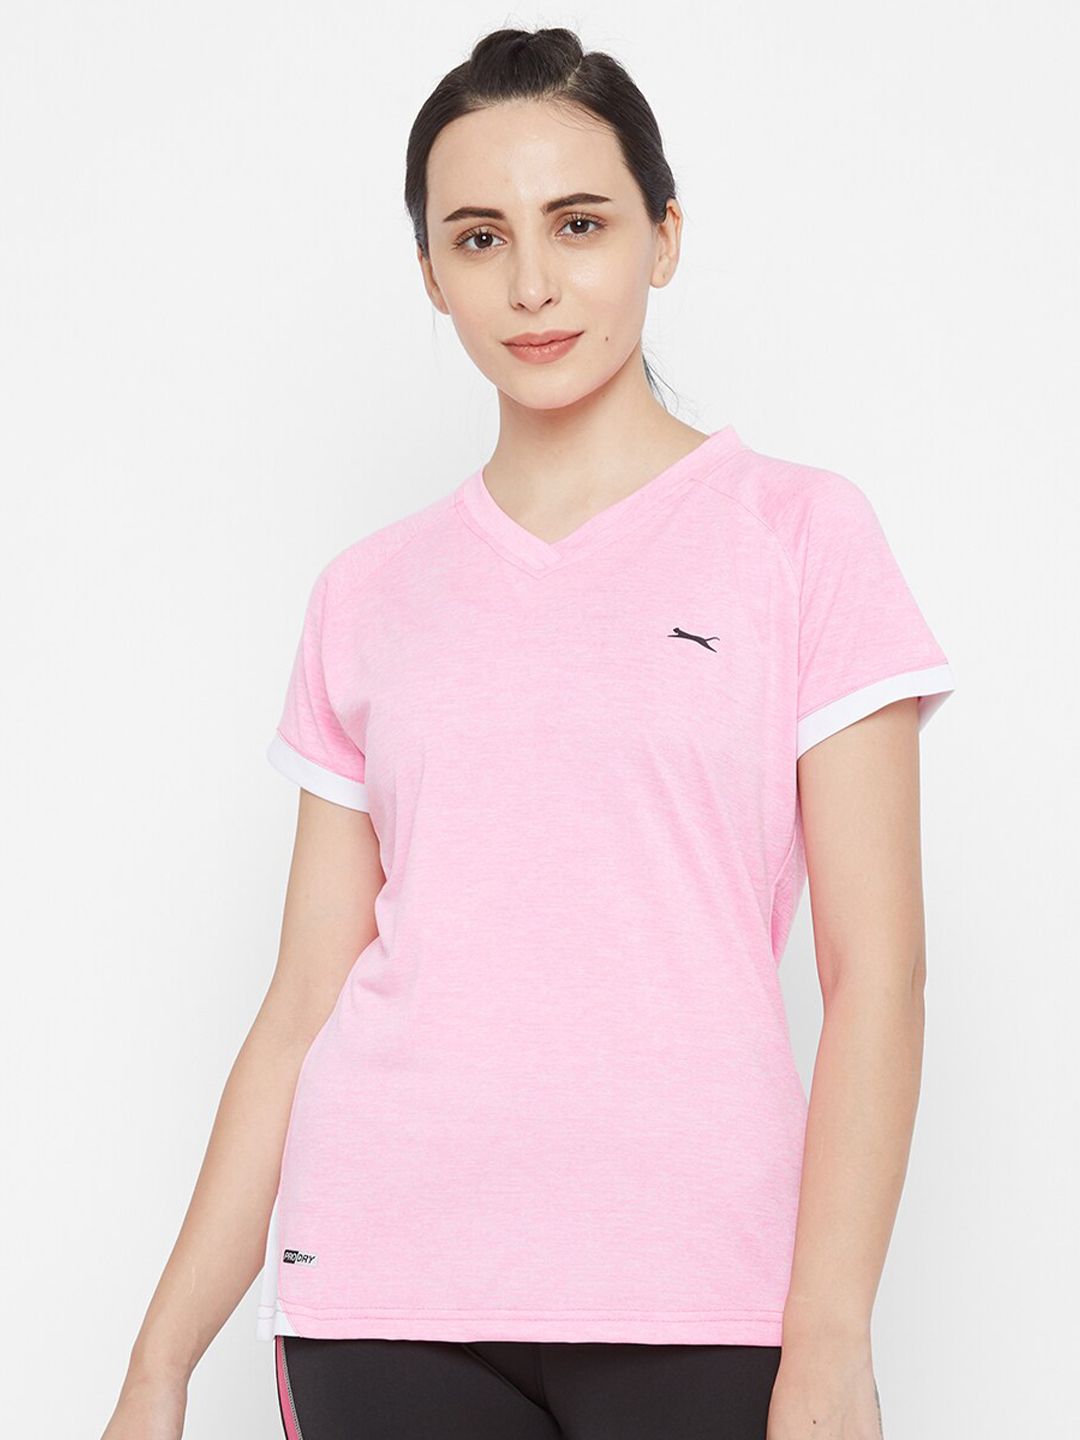 Black Panther Women Pink V-Neck Training or Gym T-shirt Price in India